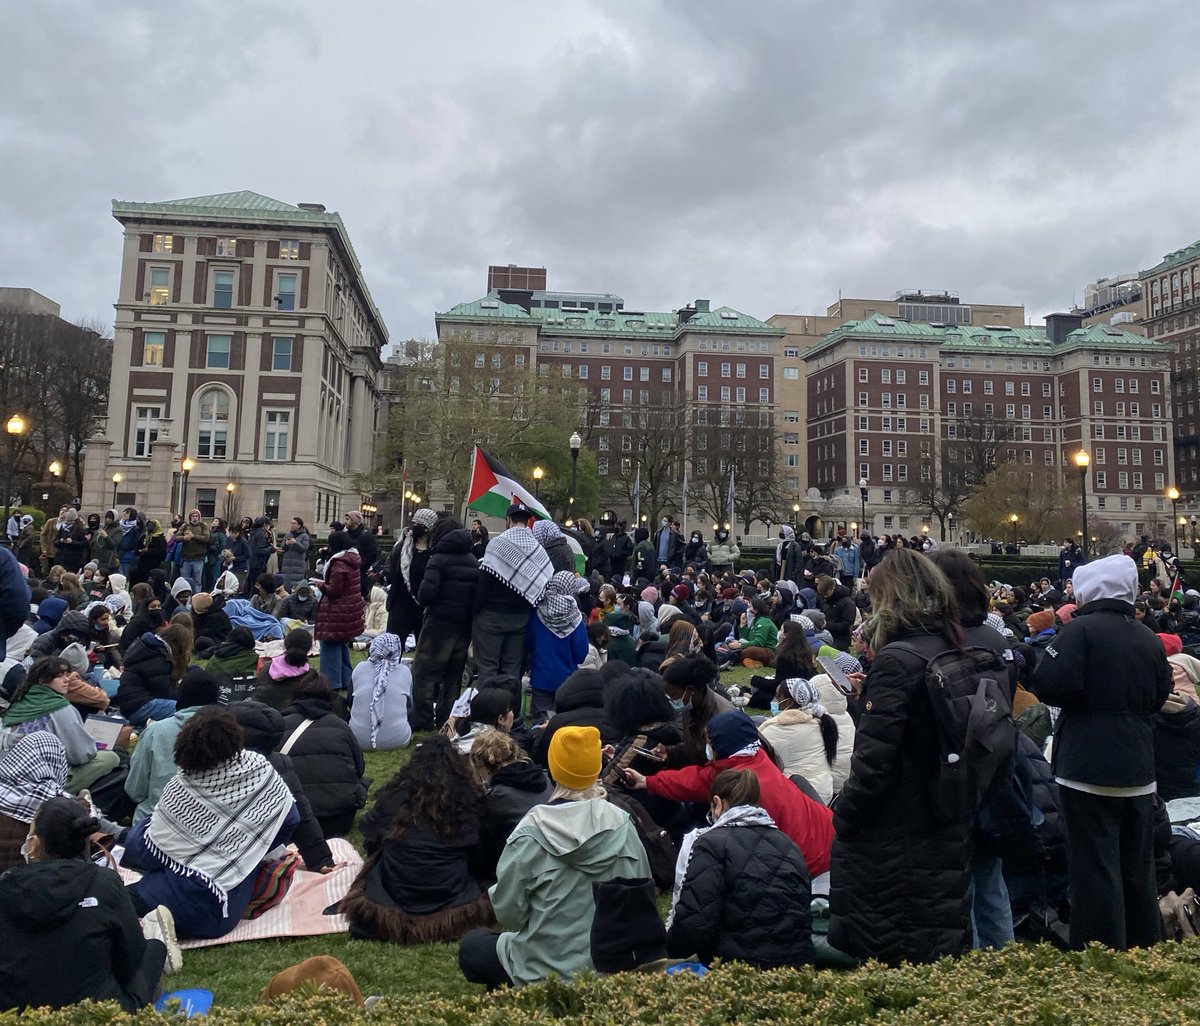 I won’t be coming back for any university sponsored reunions, but I’m a @Columbia alum and I’m back on campus today to show my solidarity with these brave students and support their demands. This is our campus.